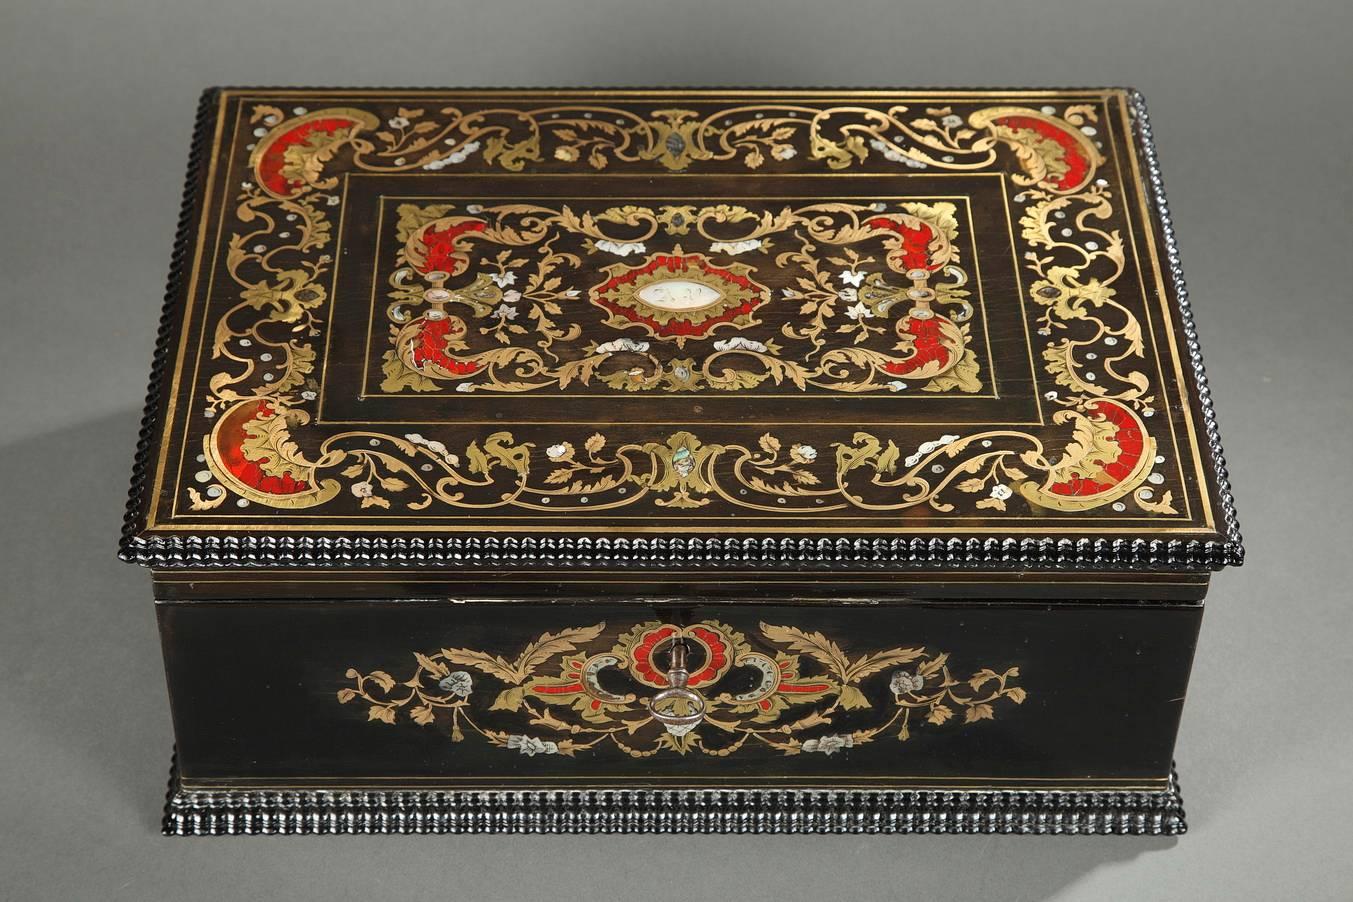 Sizeable rectangular, wooden coffer with its key. The blackened wood is inlaid with mother-of-pearl and brass. The lid and the main face of the box are richly decorated with gilded rinceau, flowers, and scrolling vegetation. The interior is lined